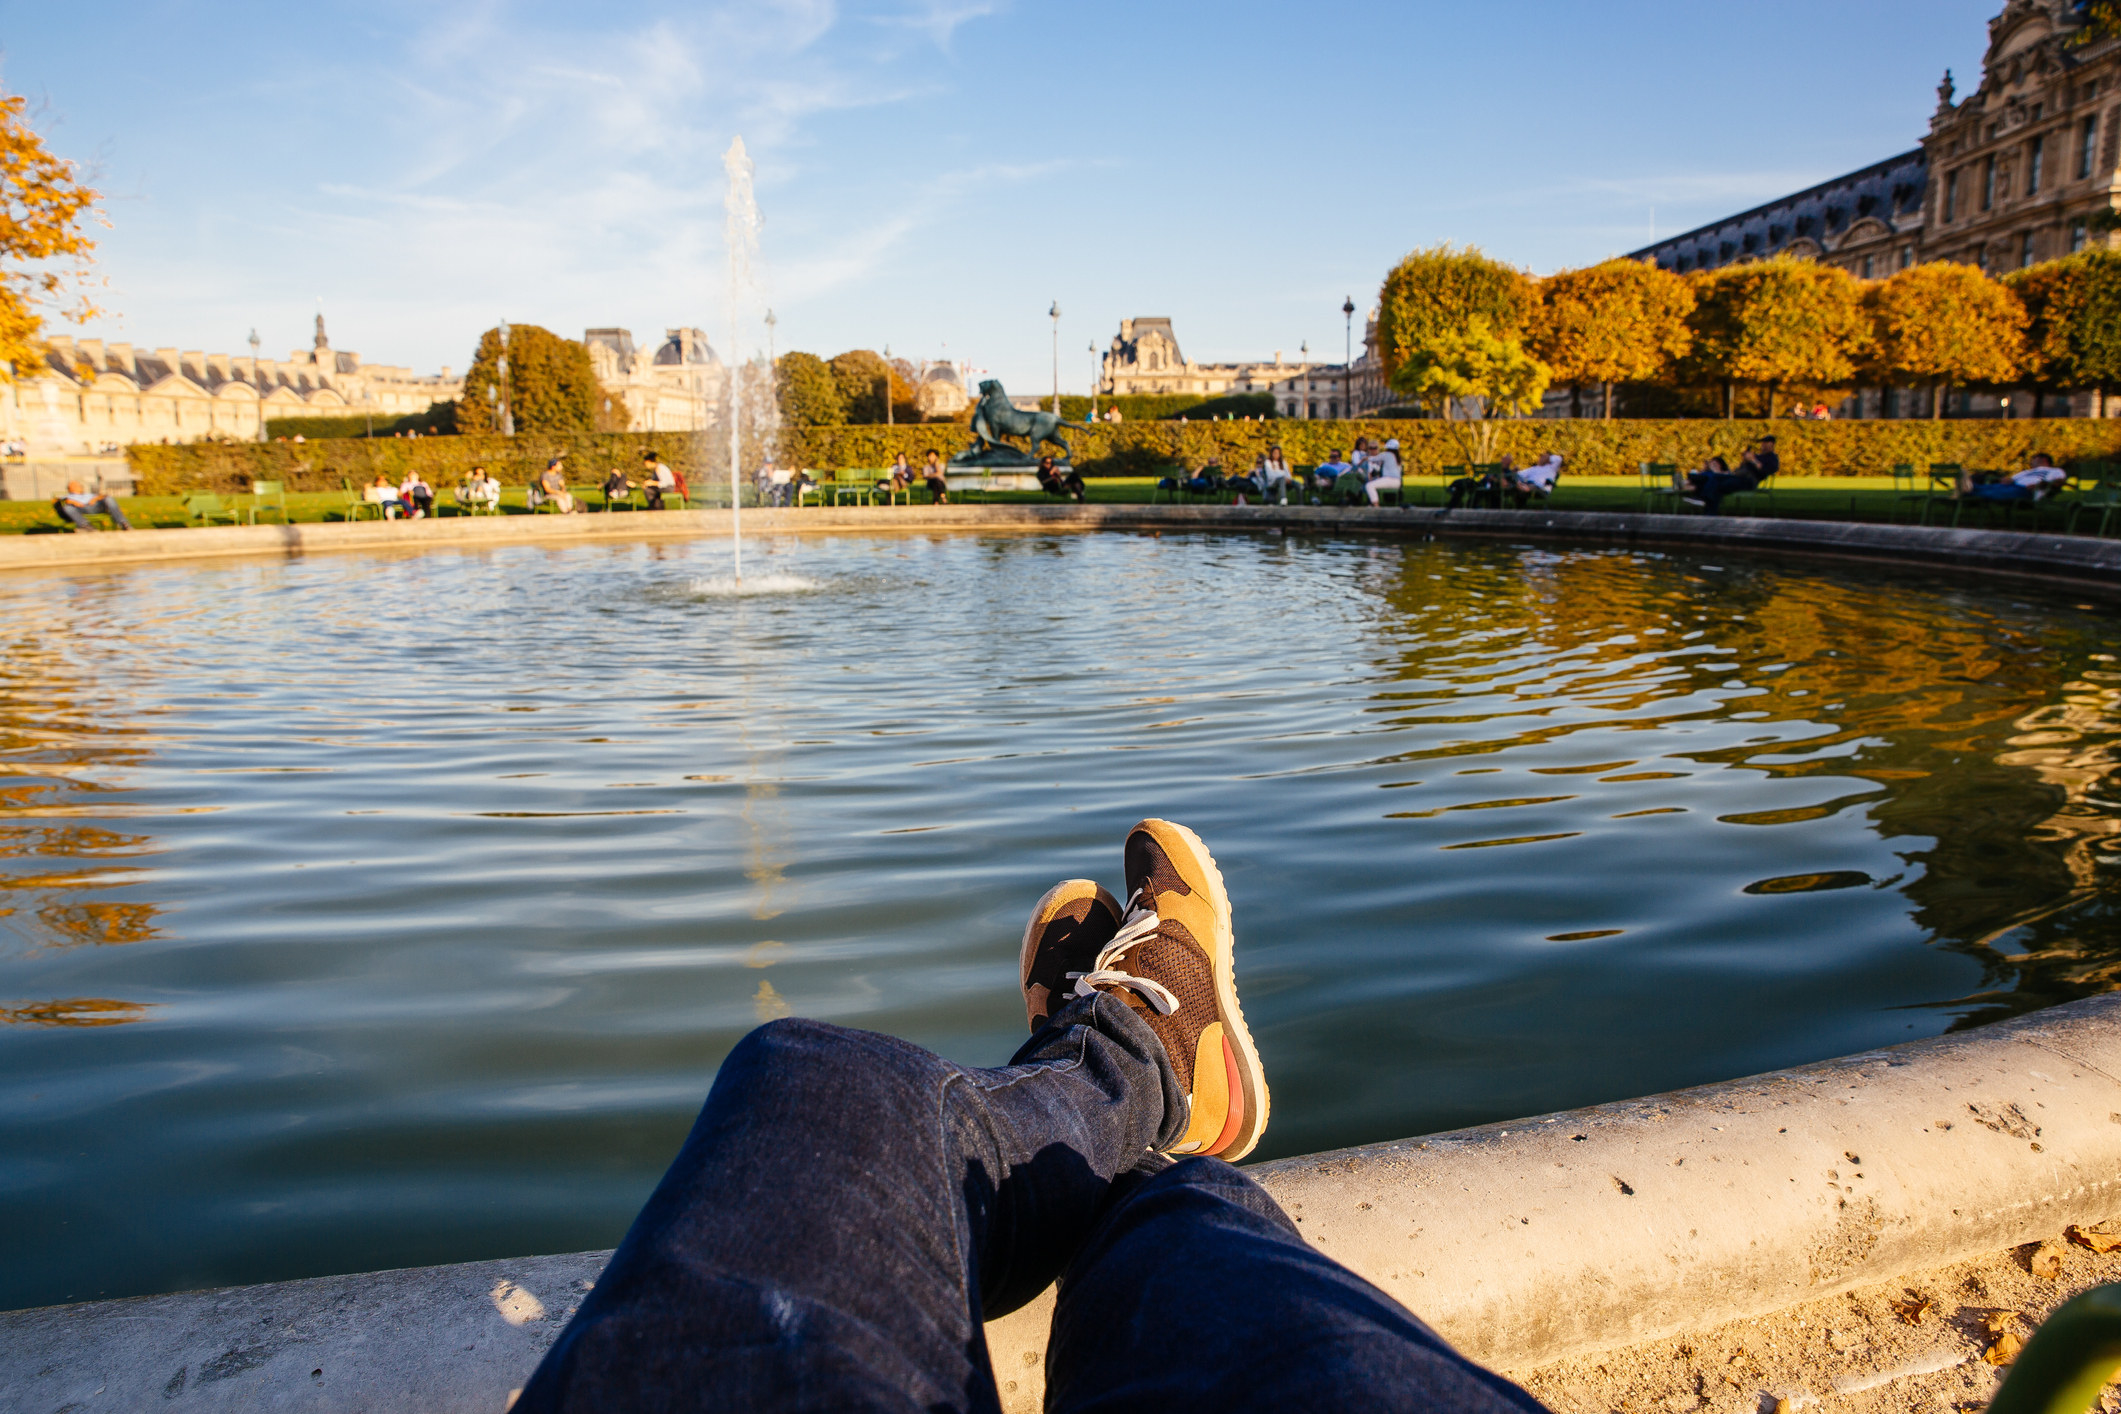 Personal perspective of someone resting by the fountain in the Tuileries Garden in Paris